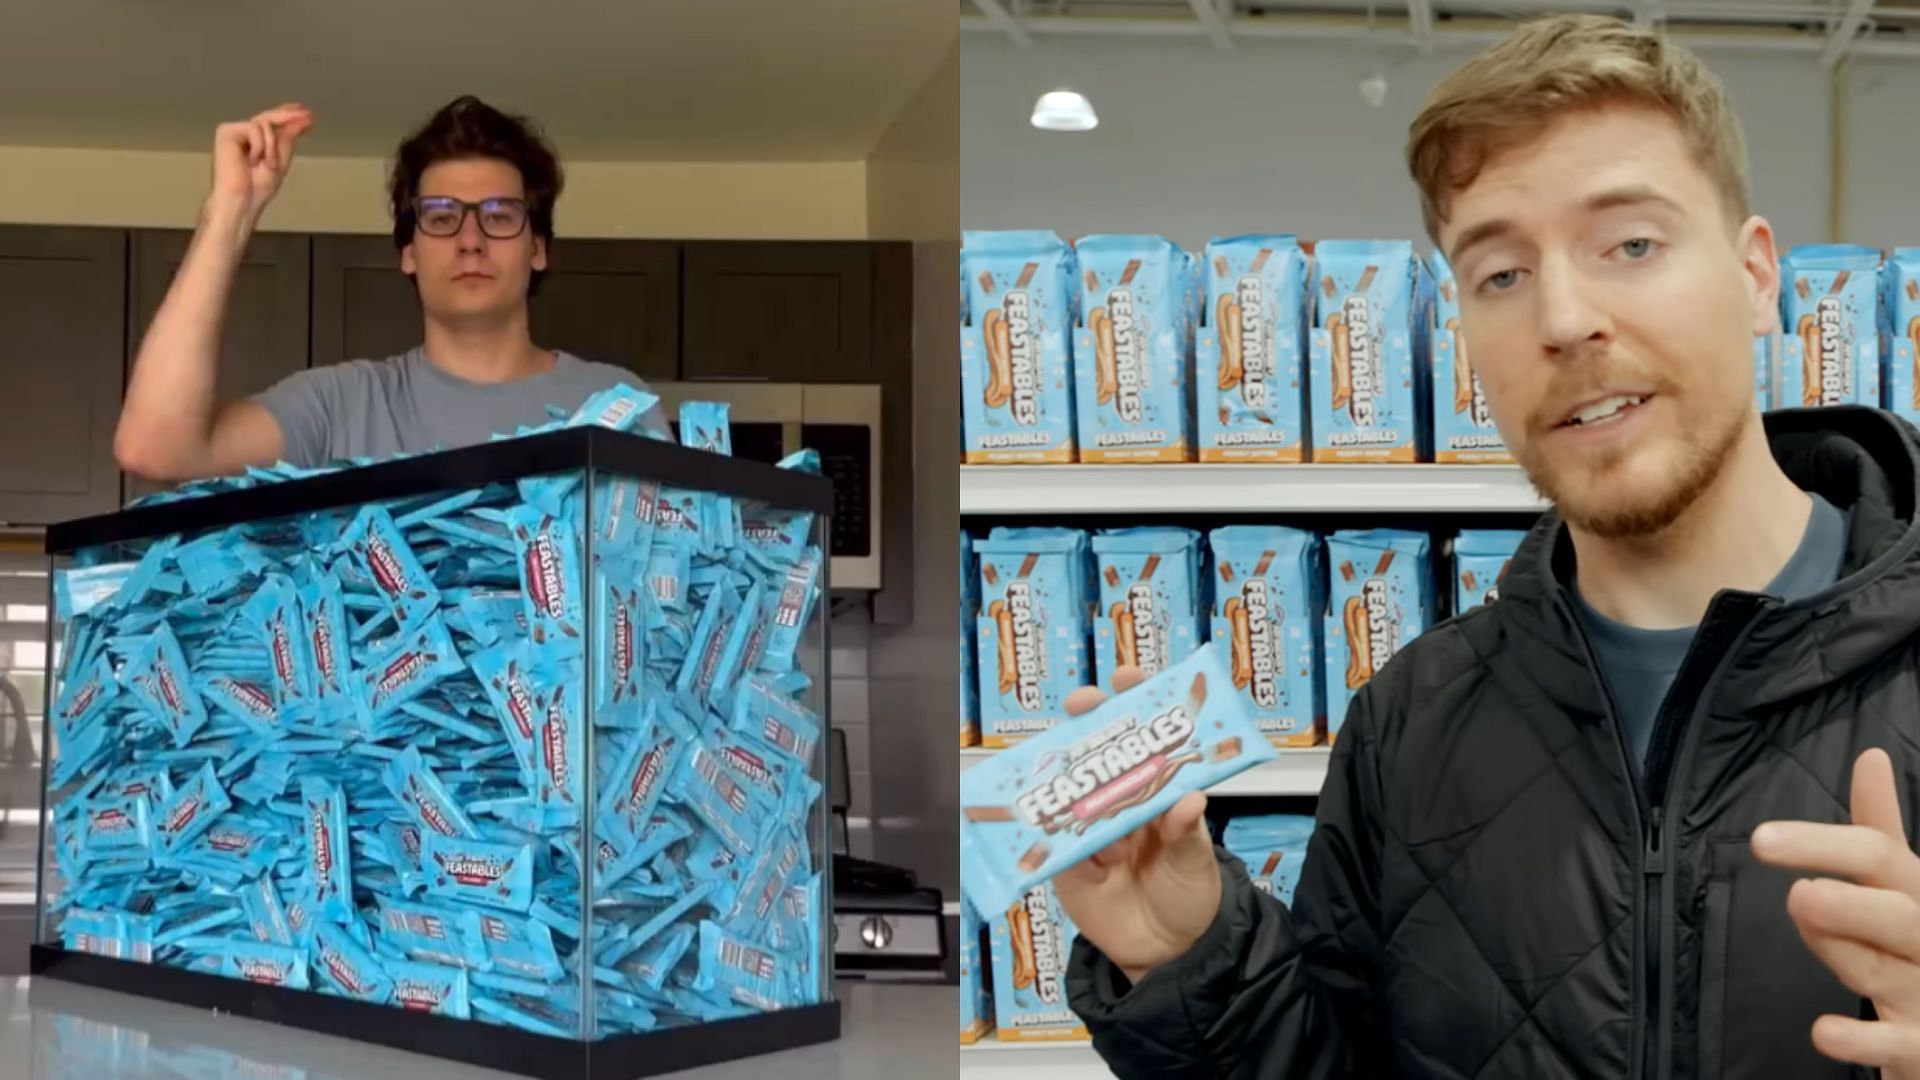 Fans reacted to a TikTok creator seemingly eating over 100 liters of Feastables chocolate (Image via DramaAlert/X and MrBeast/YouTube)